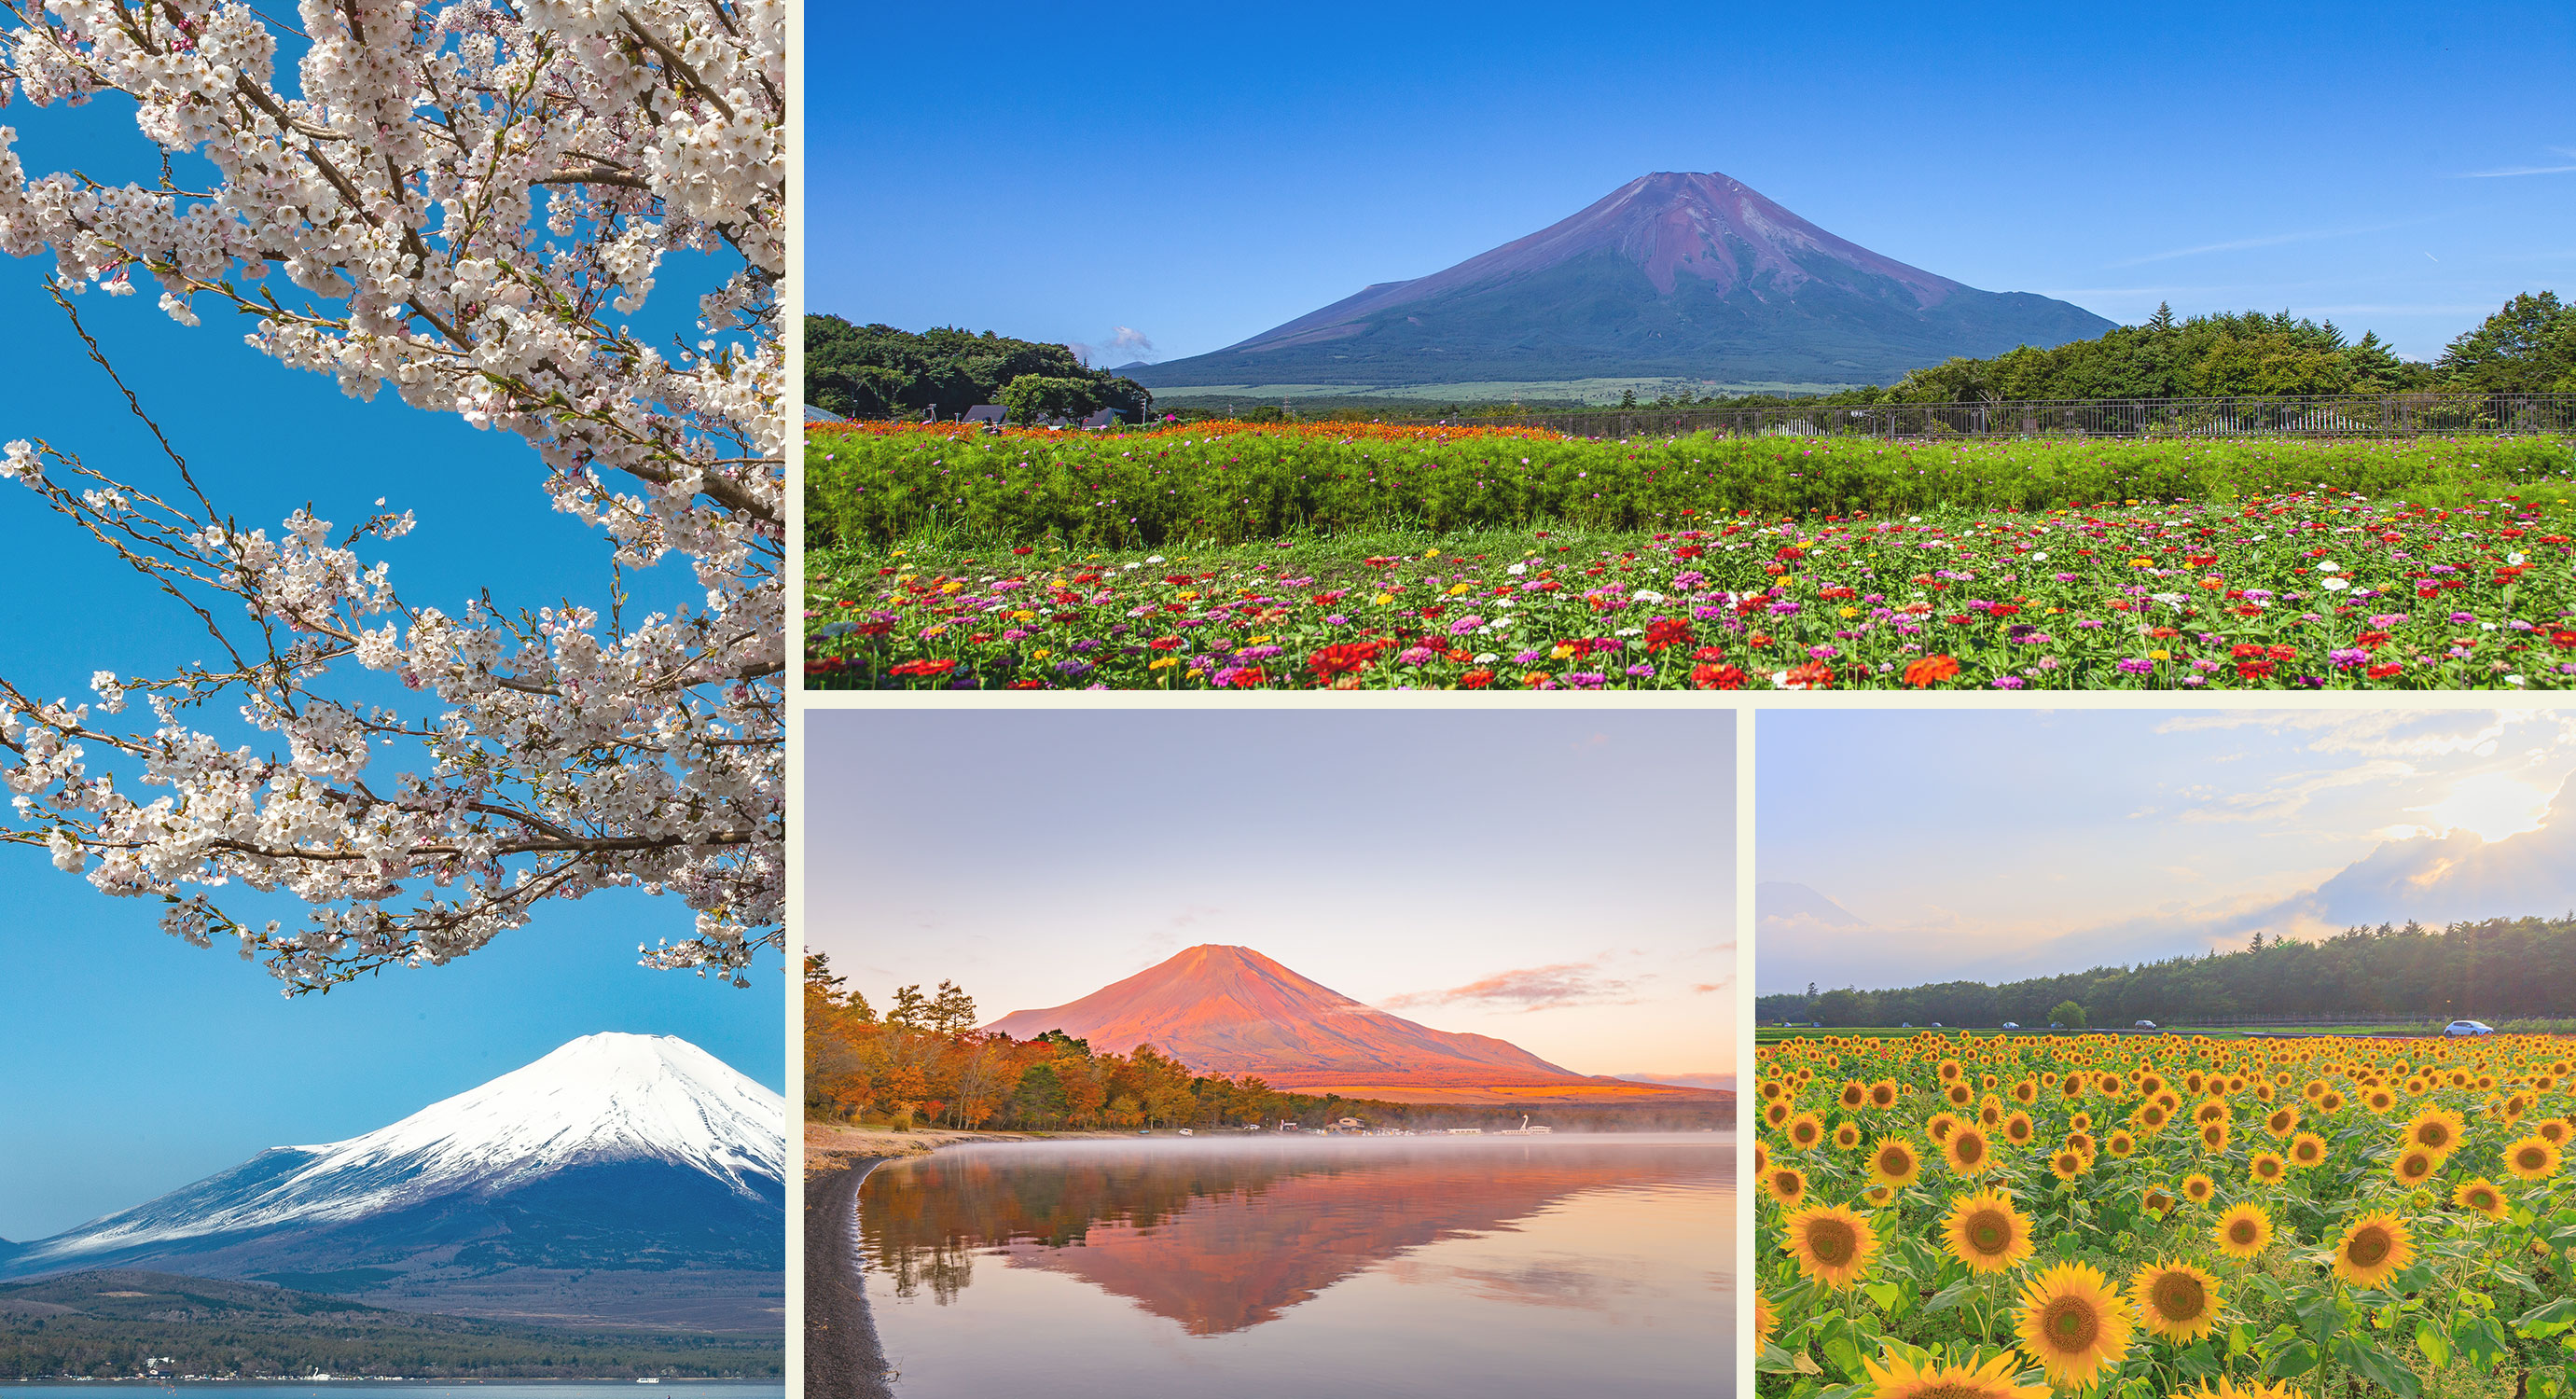 A time when you can feel the changing seasons surrounded by Mt. Fuji and the surface of the lake.